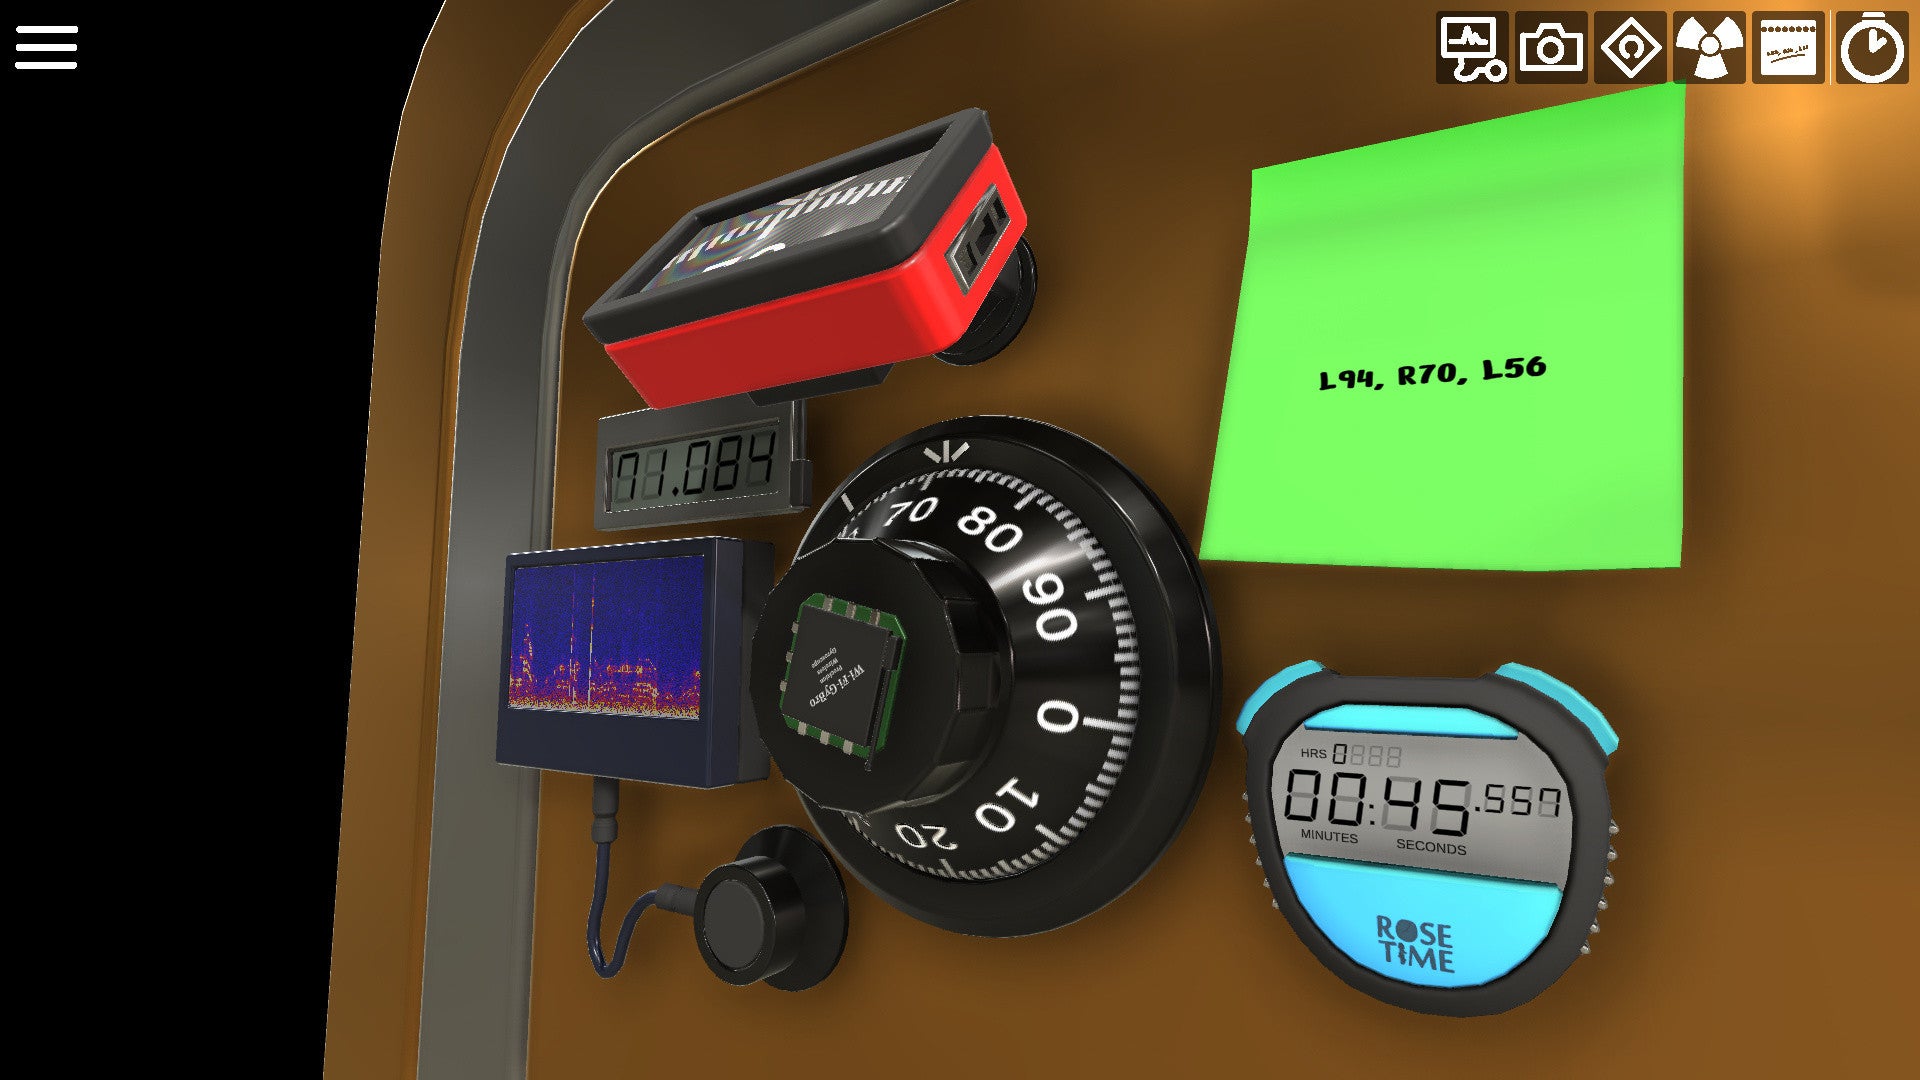 Sophie's Safecracking Simulator - A safe dial surrounded by a sticky note with a combination written on it, a timer, and other safecracking tools.